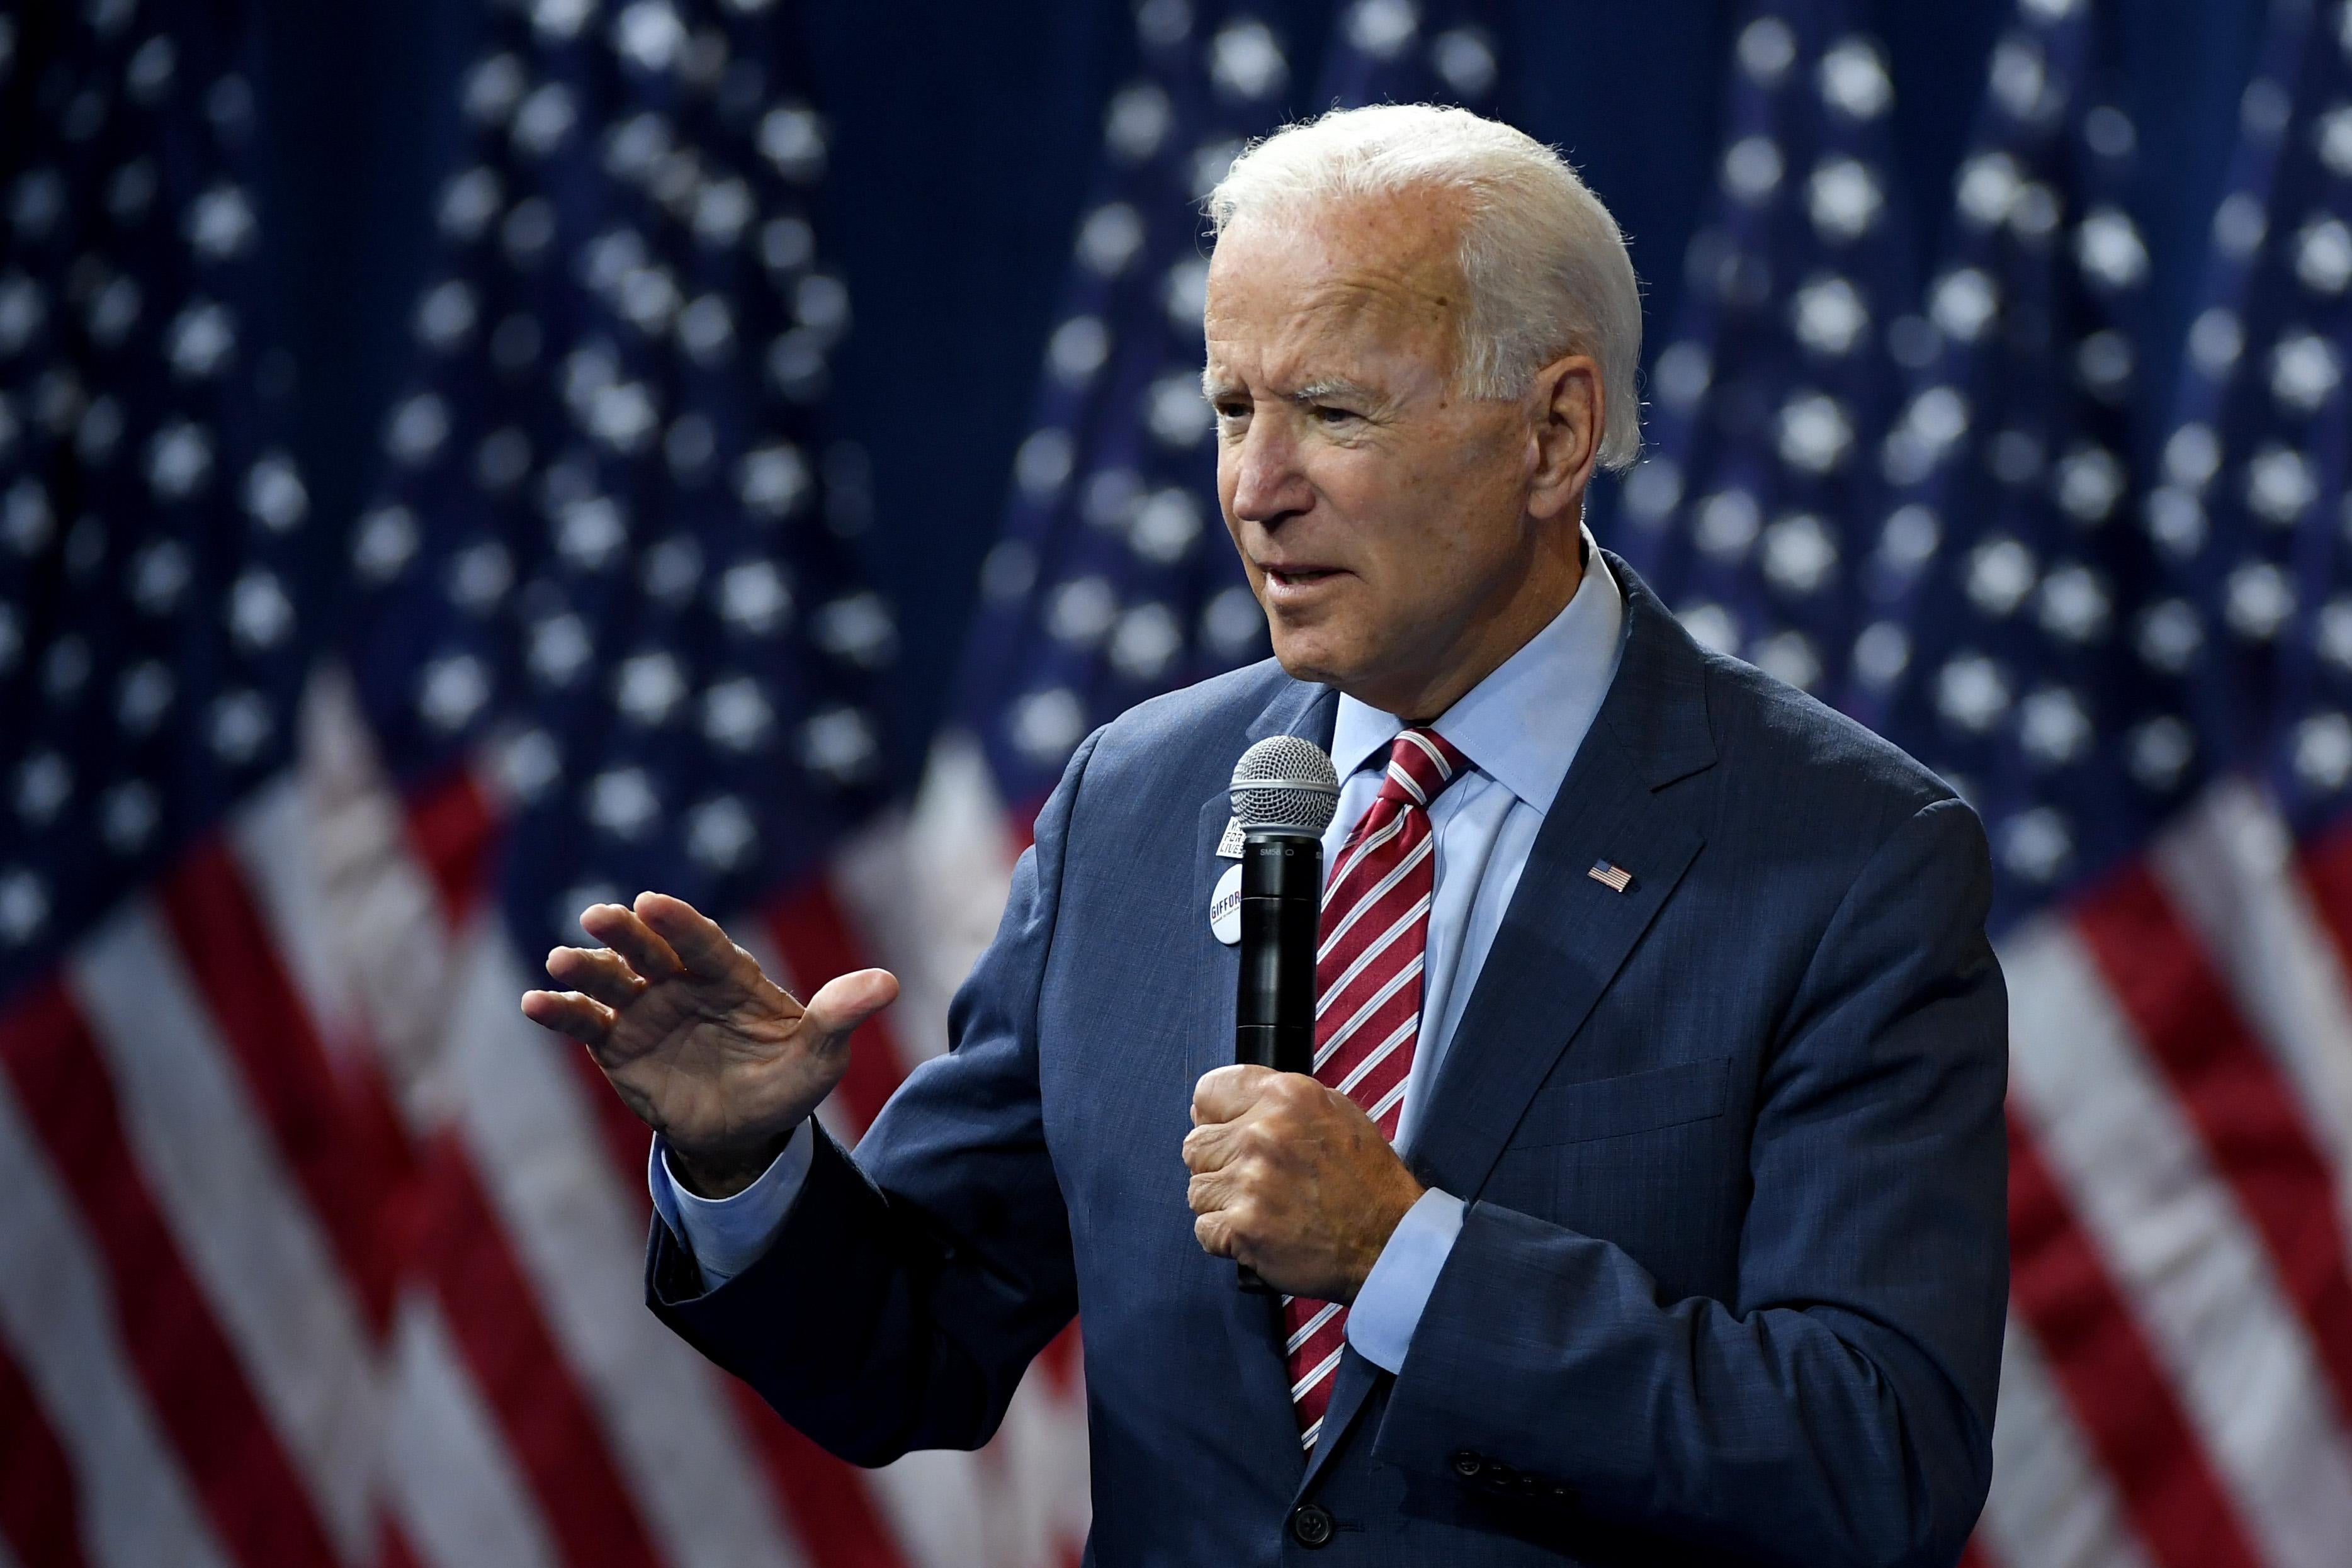 Joe Biden speaks during the 2020 Gun Safety Forum hosted by gun control activist groups Giffords and March for Our Lives at Enclave on October 2, 2019 in Las Vegas, Nevada.